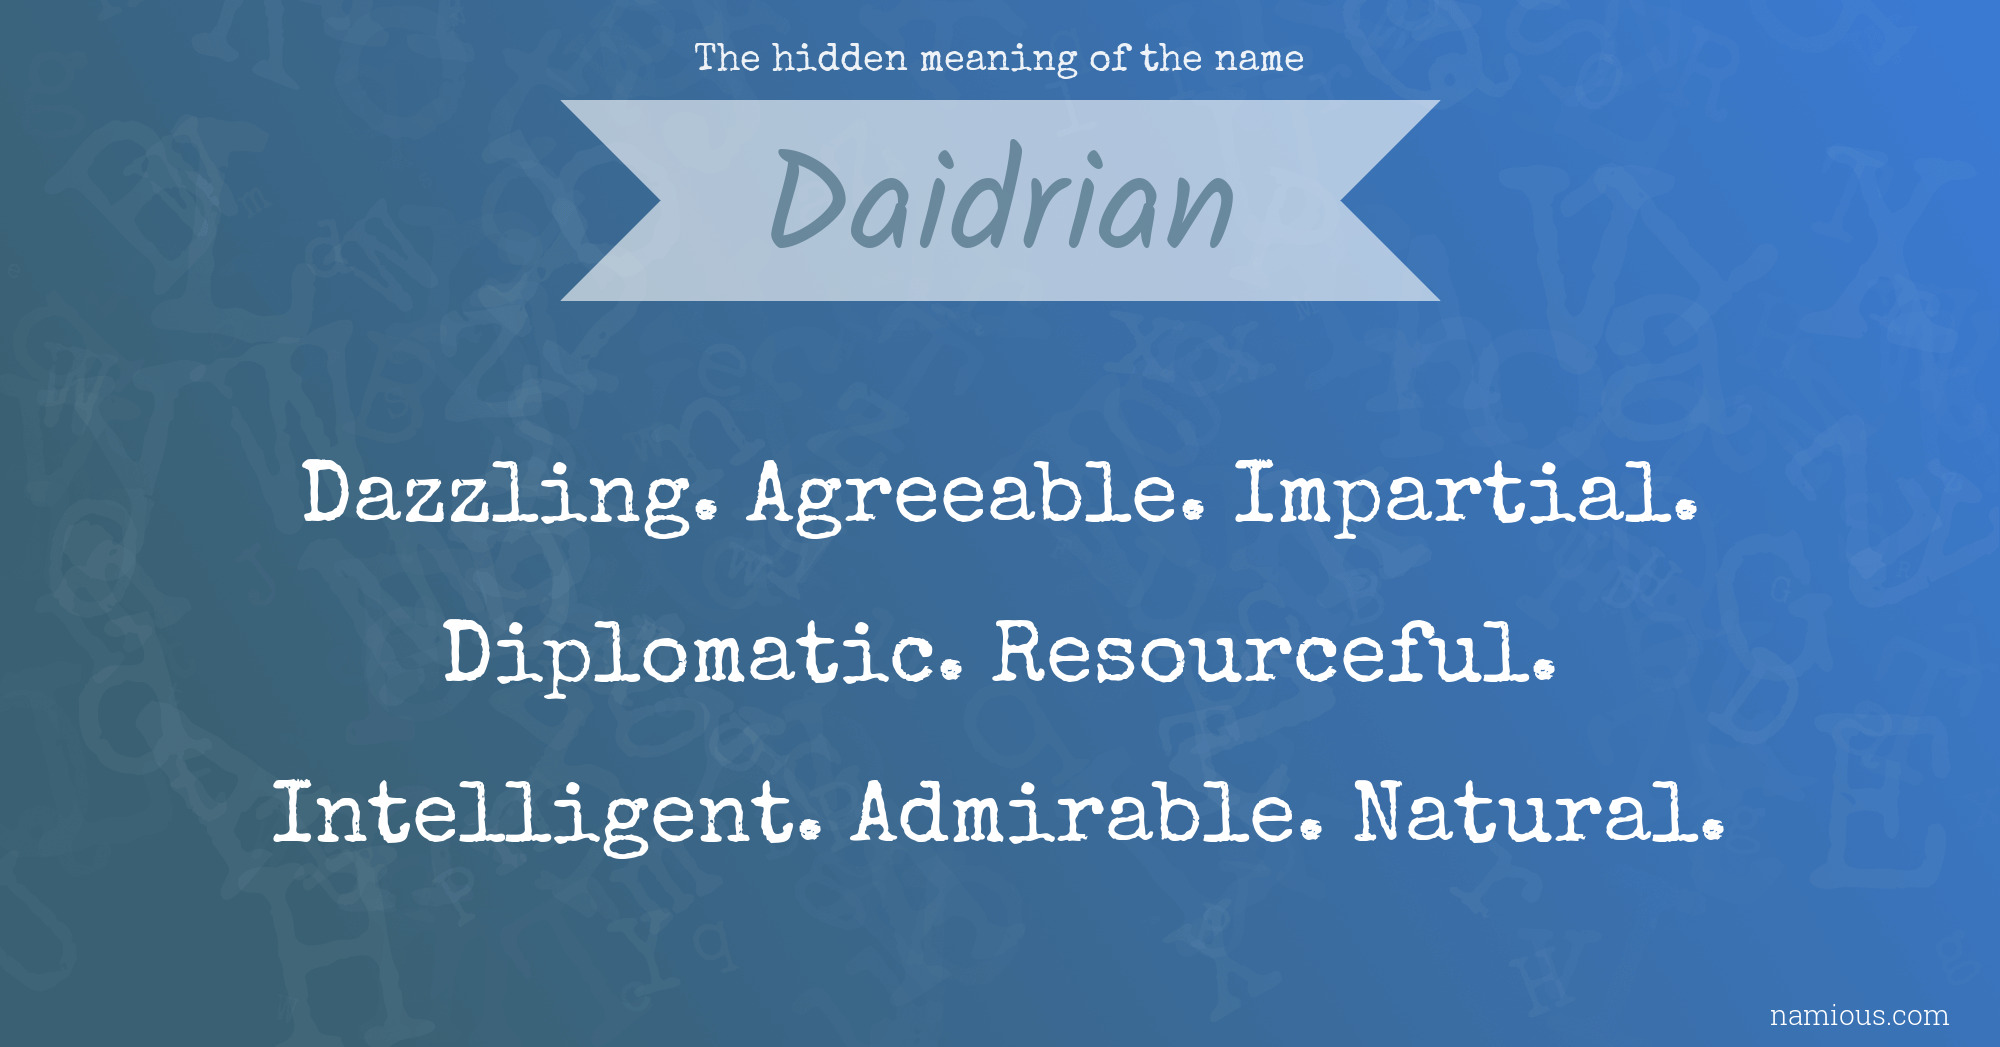 The hidden meaning of the name Daidrian